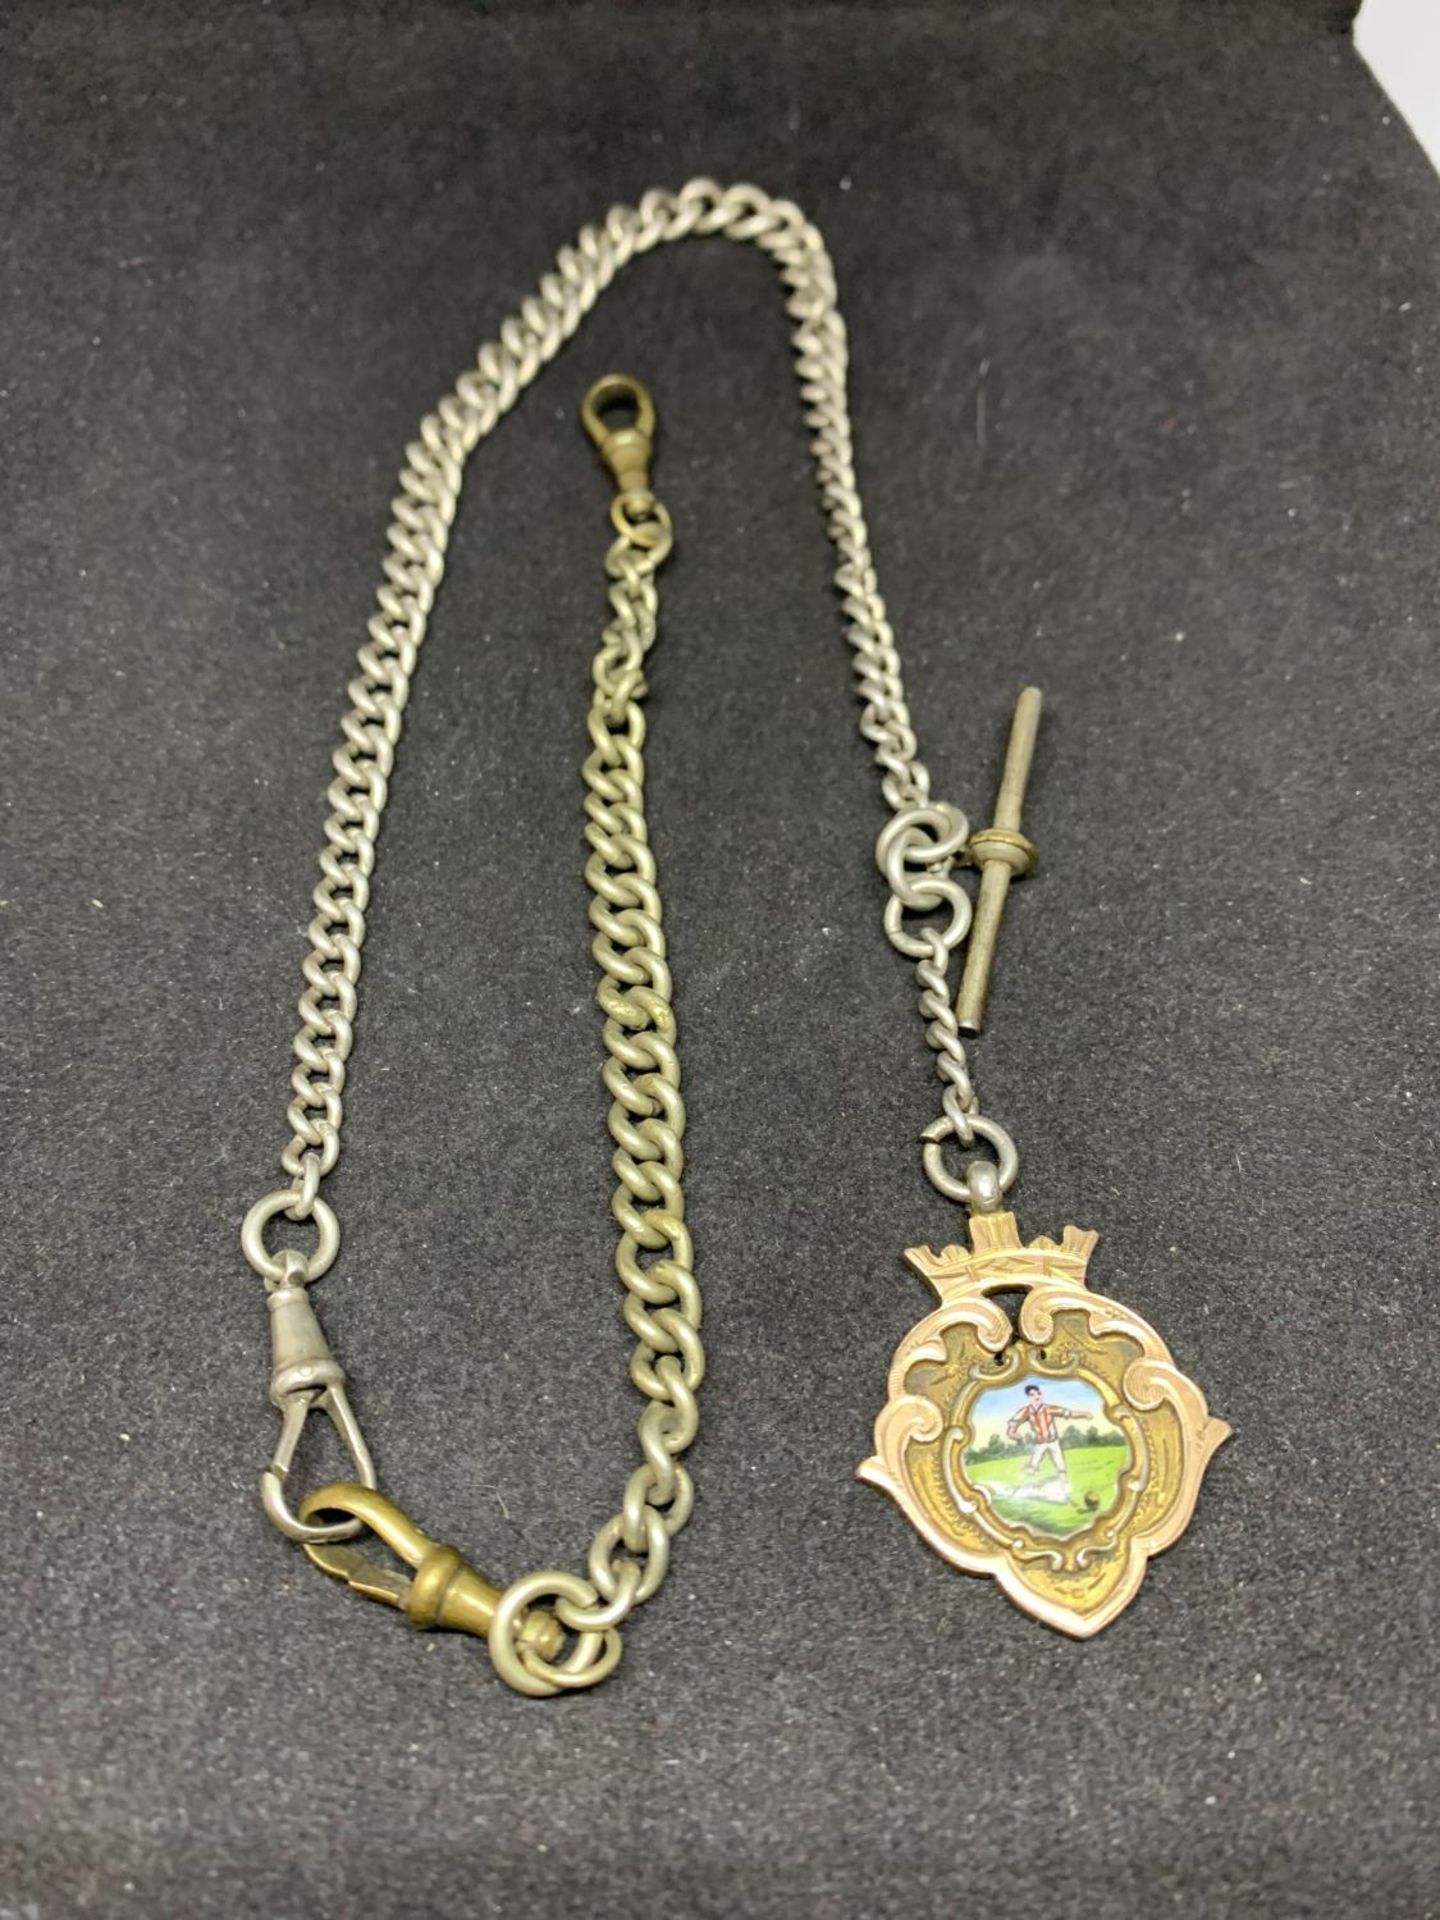 A HALLMARKED SILVER ALBERT CHAIN WITH A HALLMARKED CHESTER SILVER FOOTBALL MEDAL BELIEVED 1921